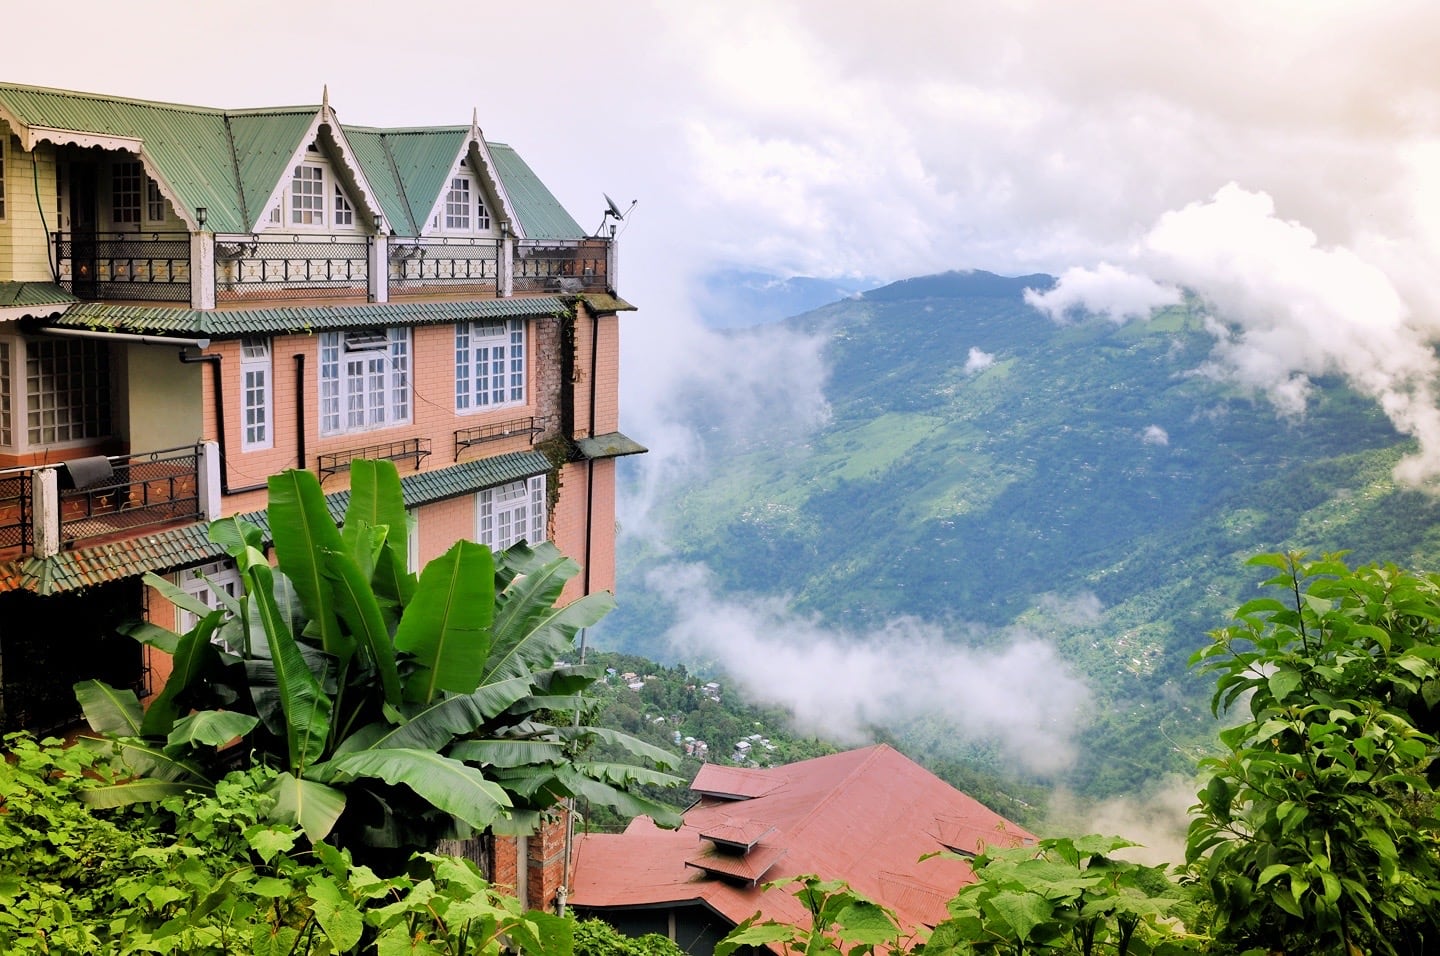 10 Best Hotels in Darjeeling for the Perfect Vacation (2021 Edition)